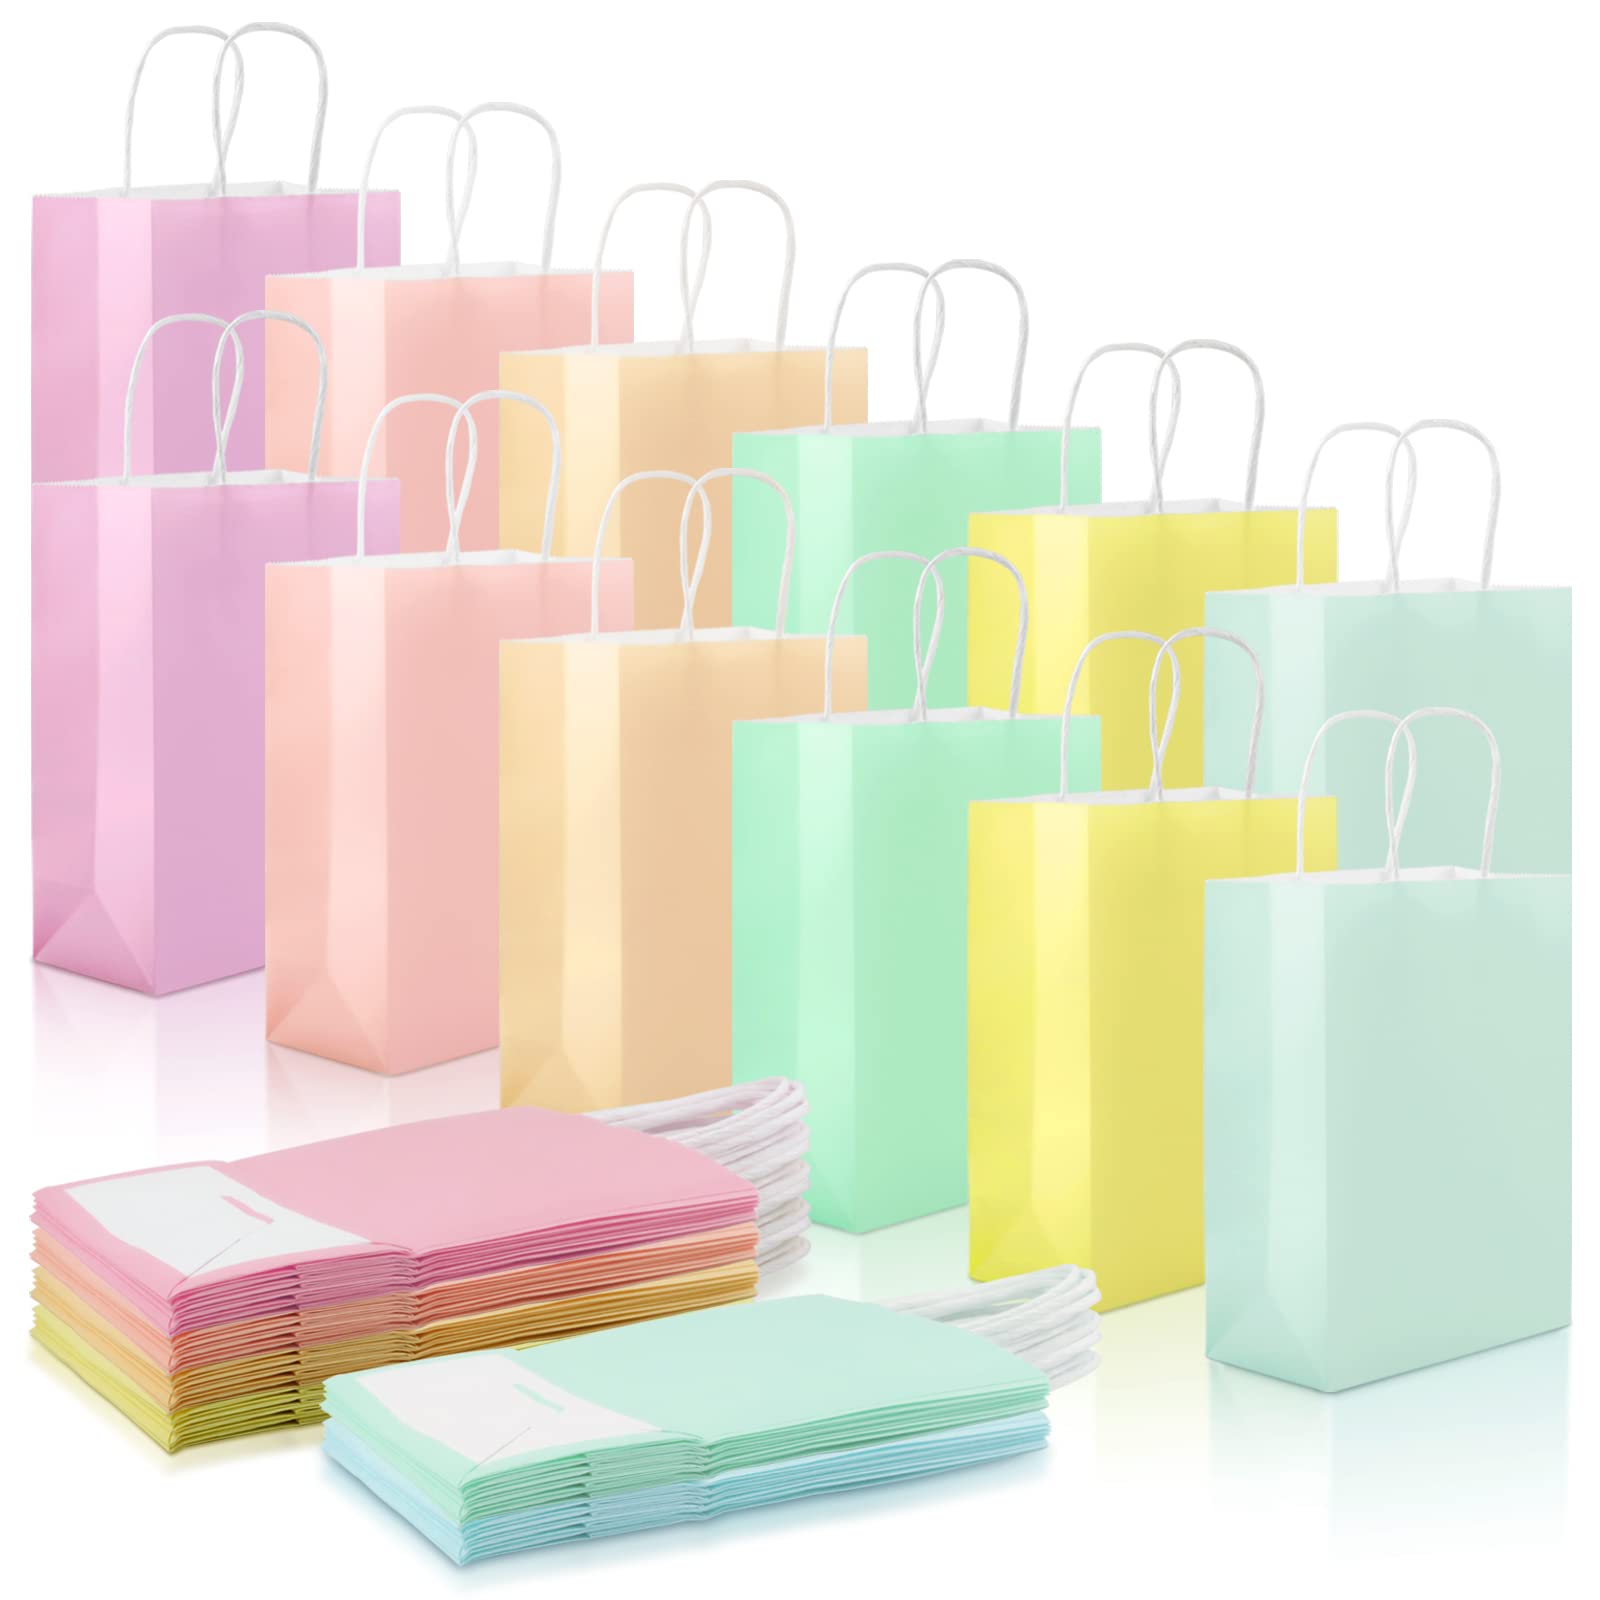 BadenBach 30 Pack Pastel Paper Gift Bags with Handle, Kraft Paper Small Party Favor Goodie Bags Bulk for Birthday Wedding Thanksgiving Halloween Christmas (8.6